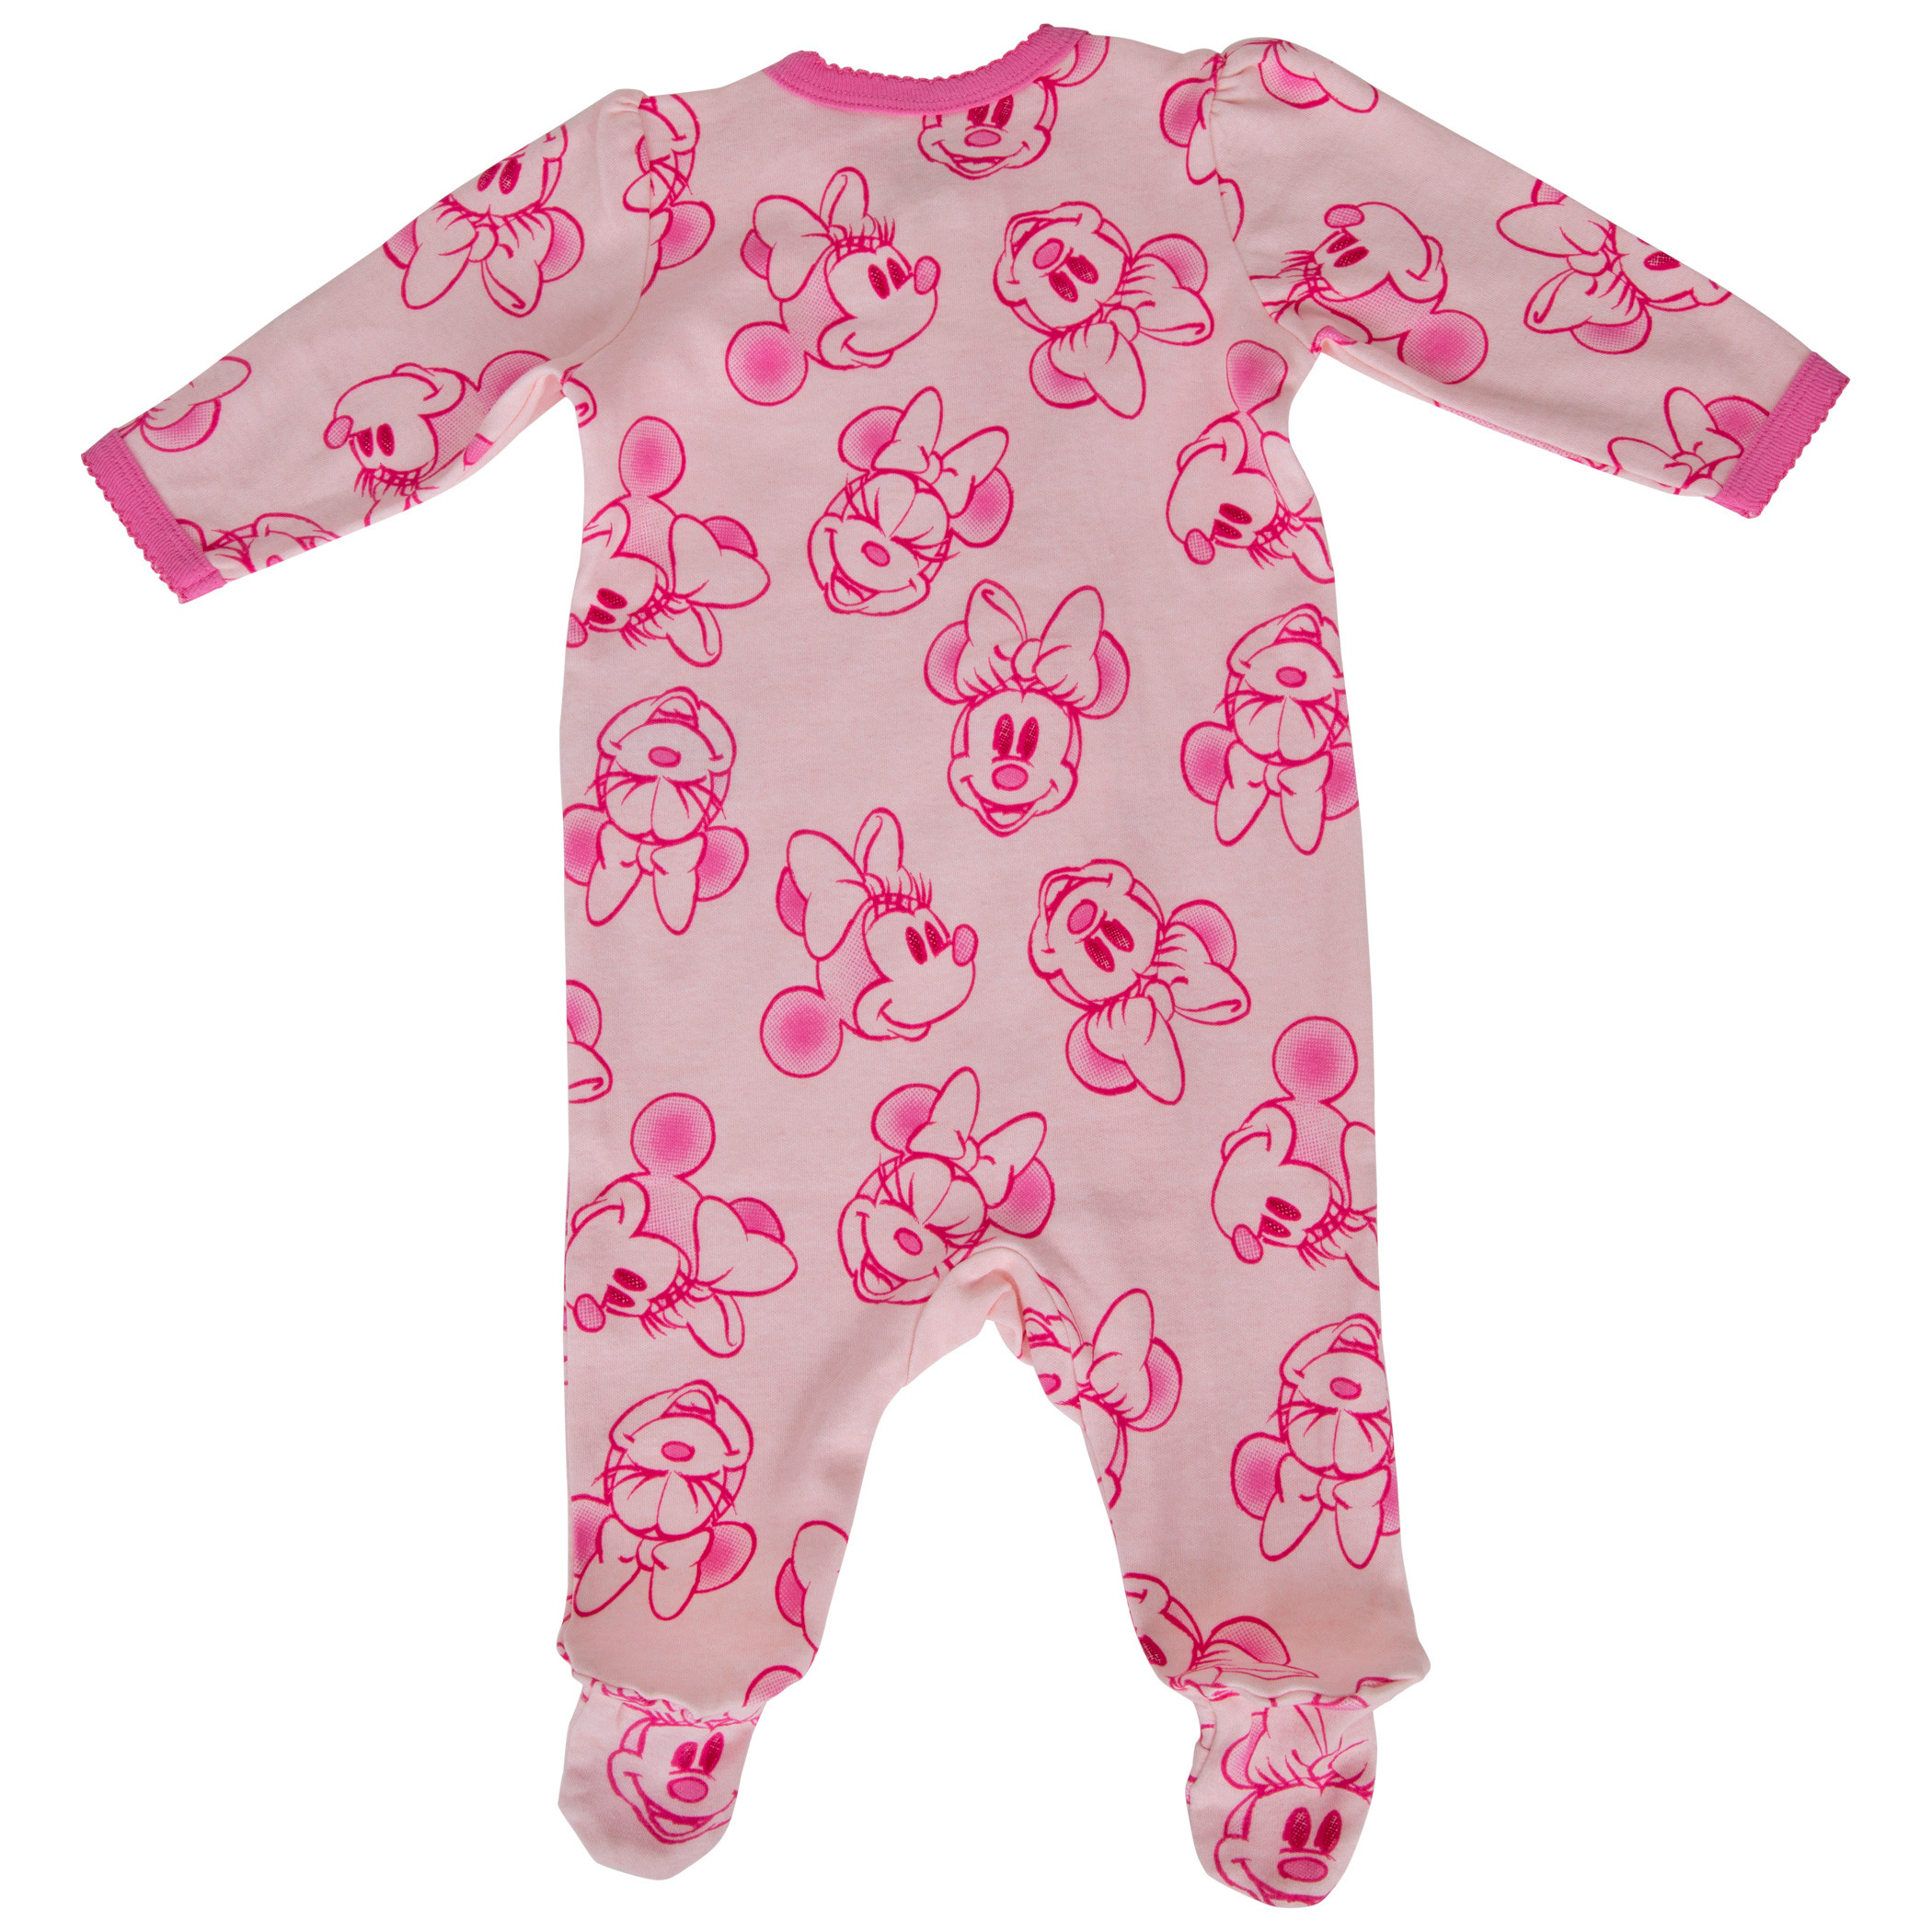 Disney Minnie Mouse Face All Over Print Infant Sleeper